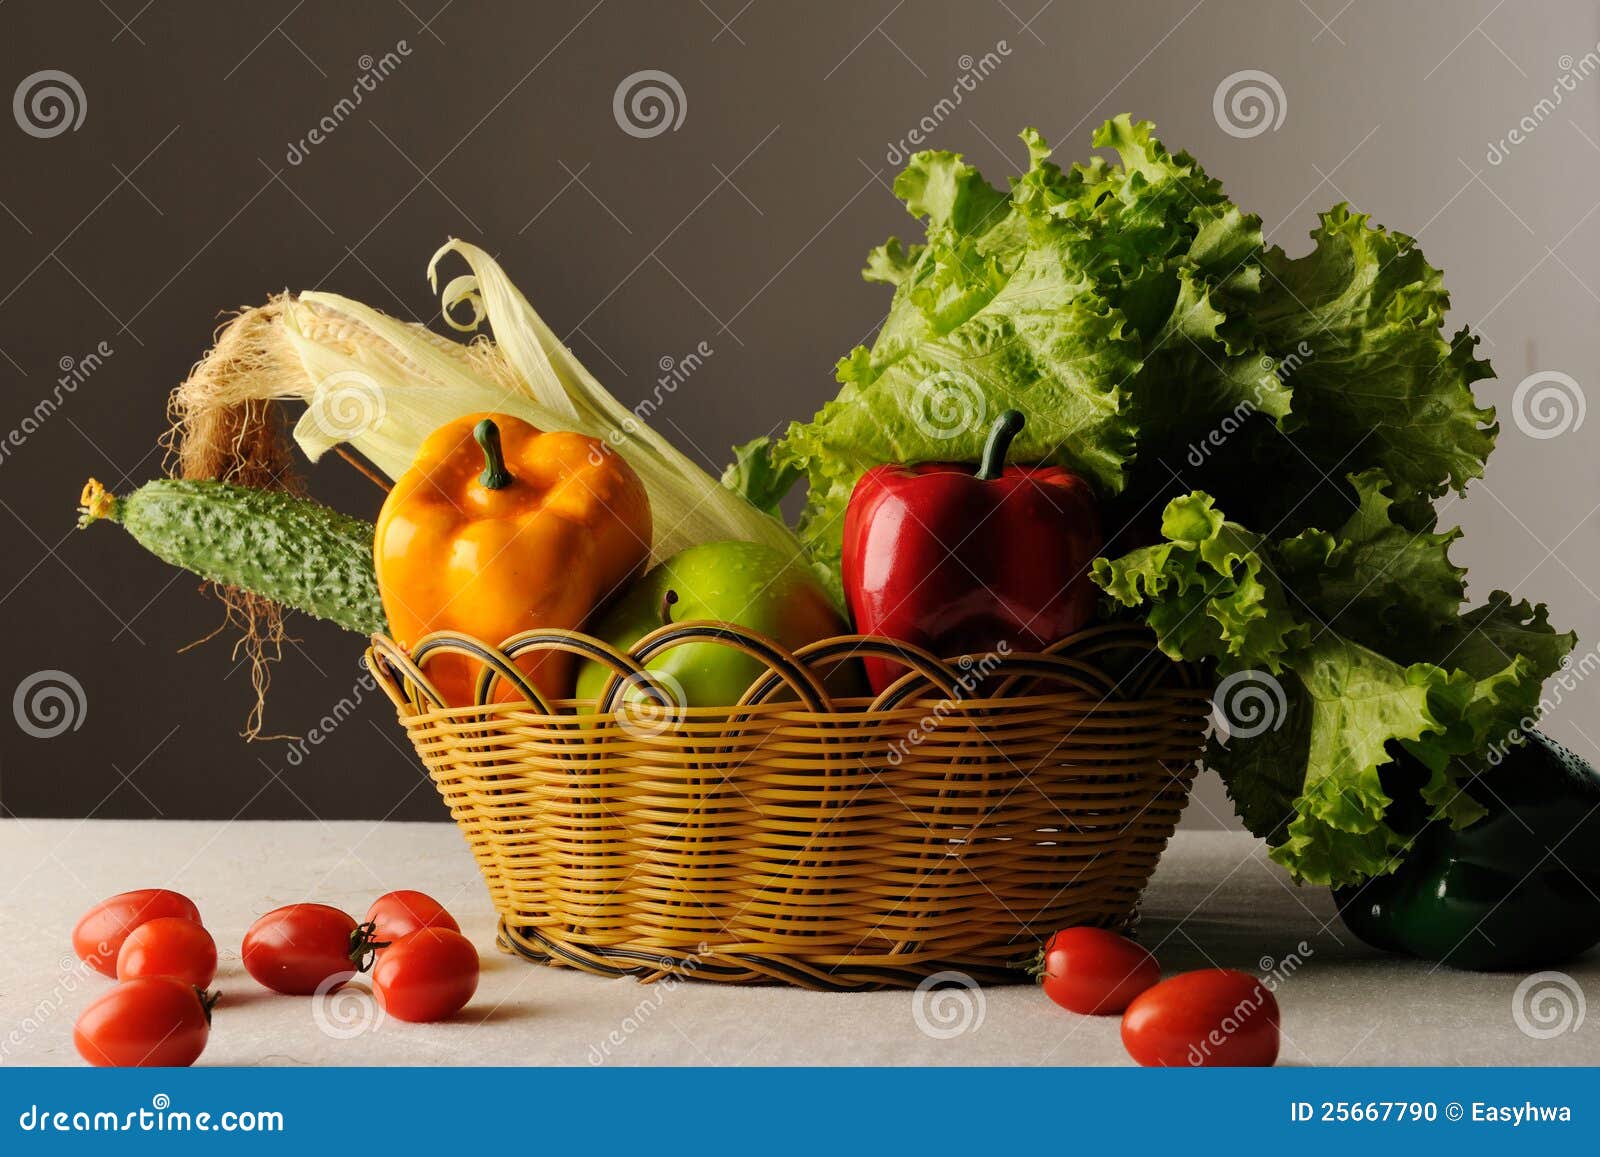 vegetable and fruits in basket